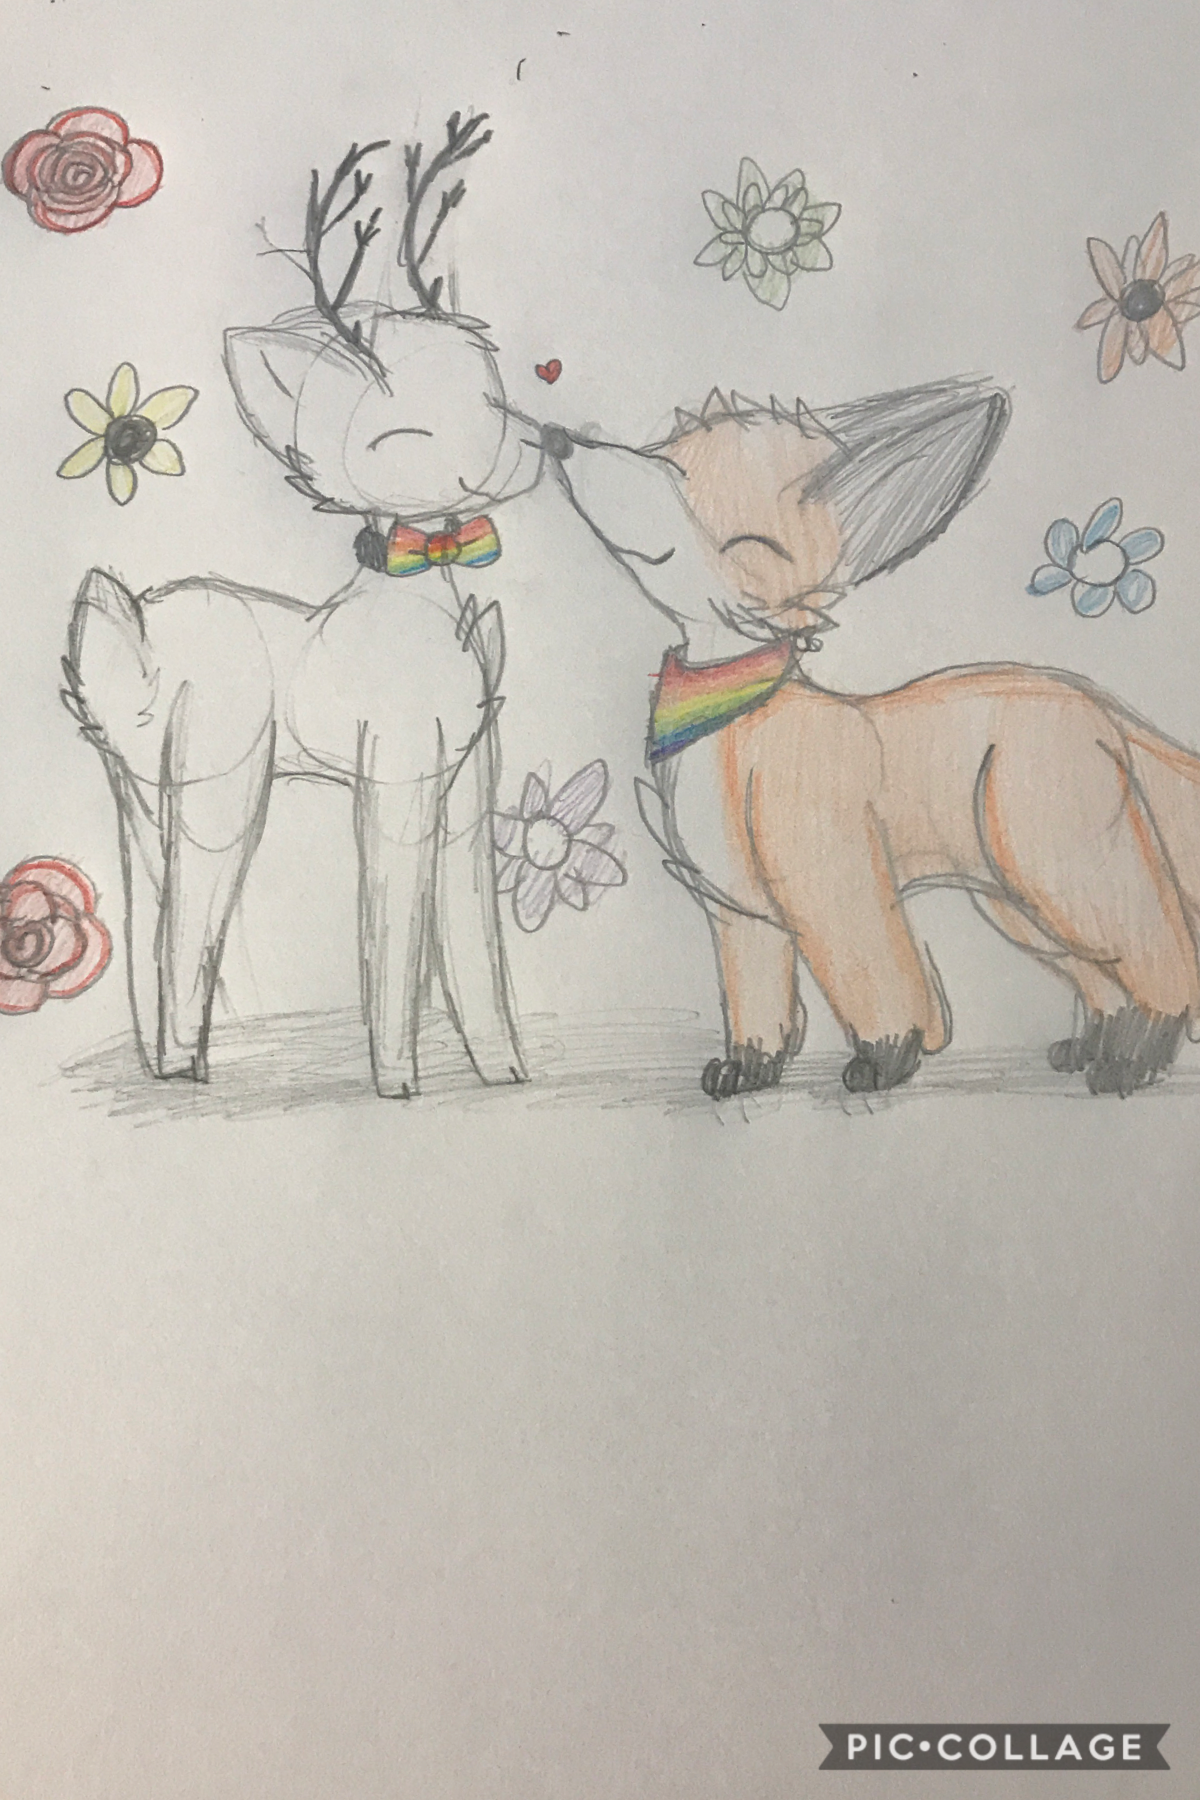 |tap| 
Happy pride month 🏳️‍🌈ik a lot is going on but I’m still going to post pride stuff. My gay bois billy and Marley 